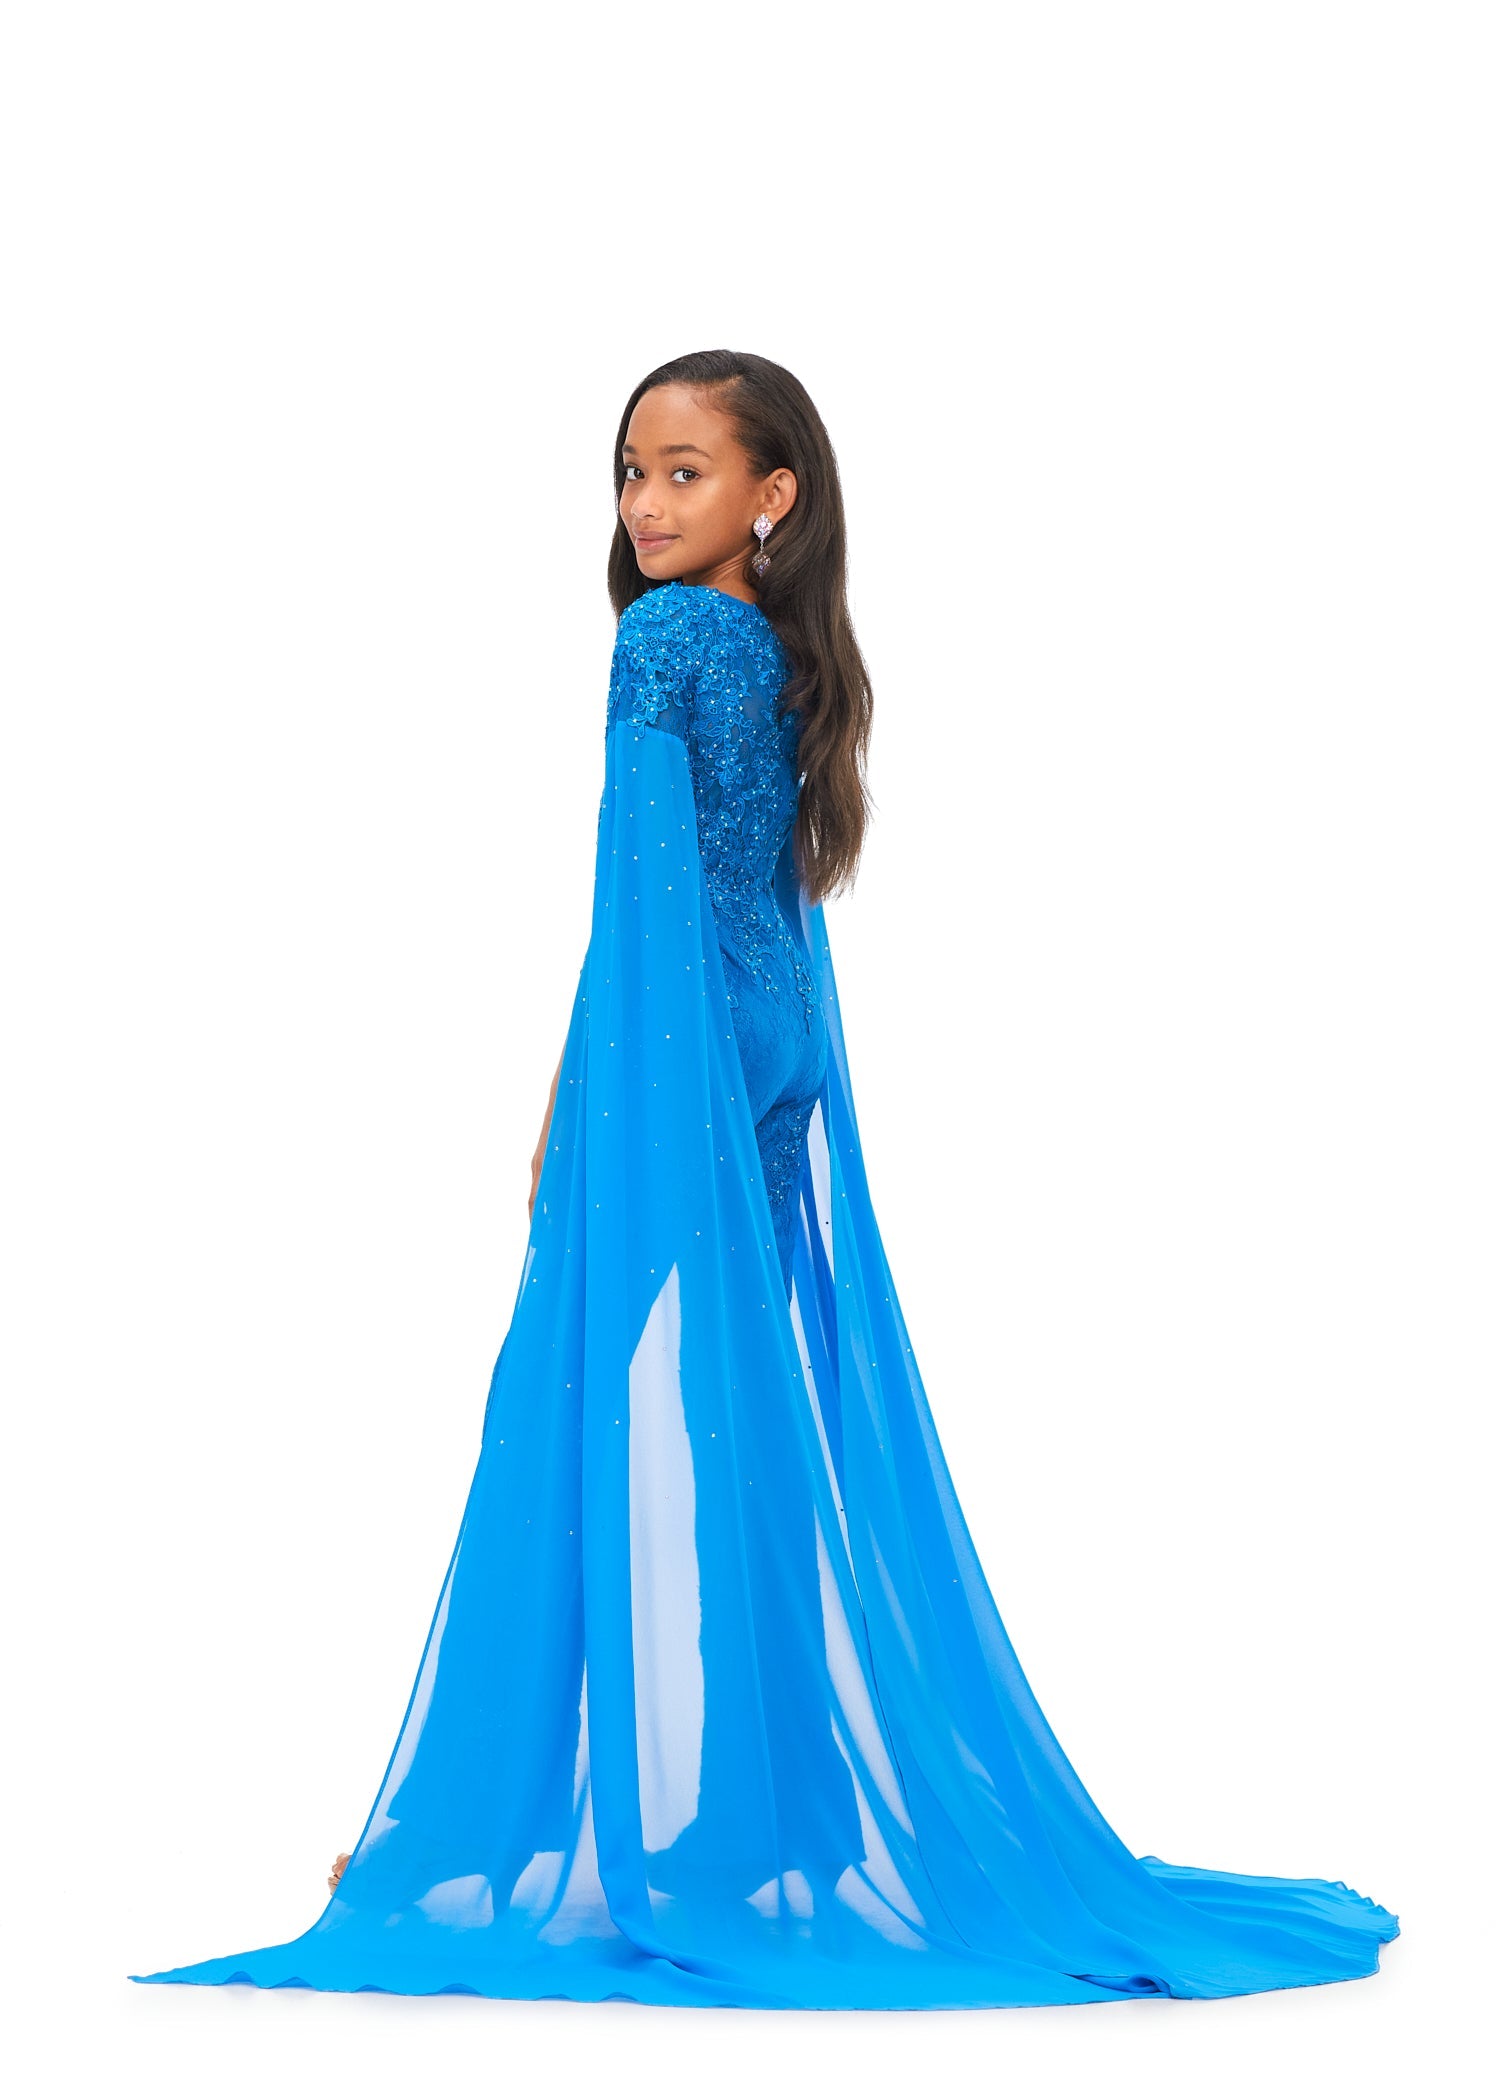 Buy Toy Truffle Perfect Superhero Cape Dress for Kids party, Theme Party,  Birthday gifts, dress-up, costume parties, Fancy Dress Parties, School  Dramas (Type 15) Online at Low Prices in India - Amazon.in